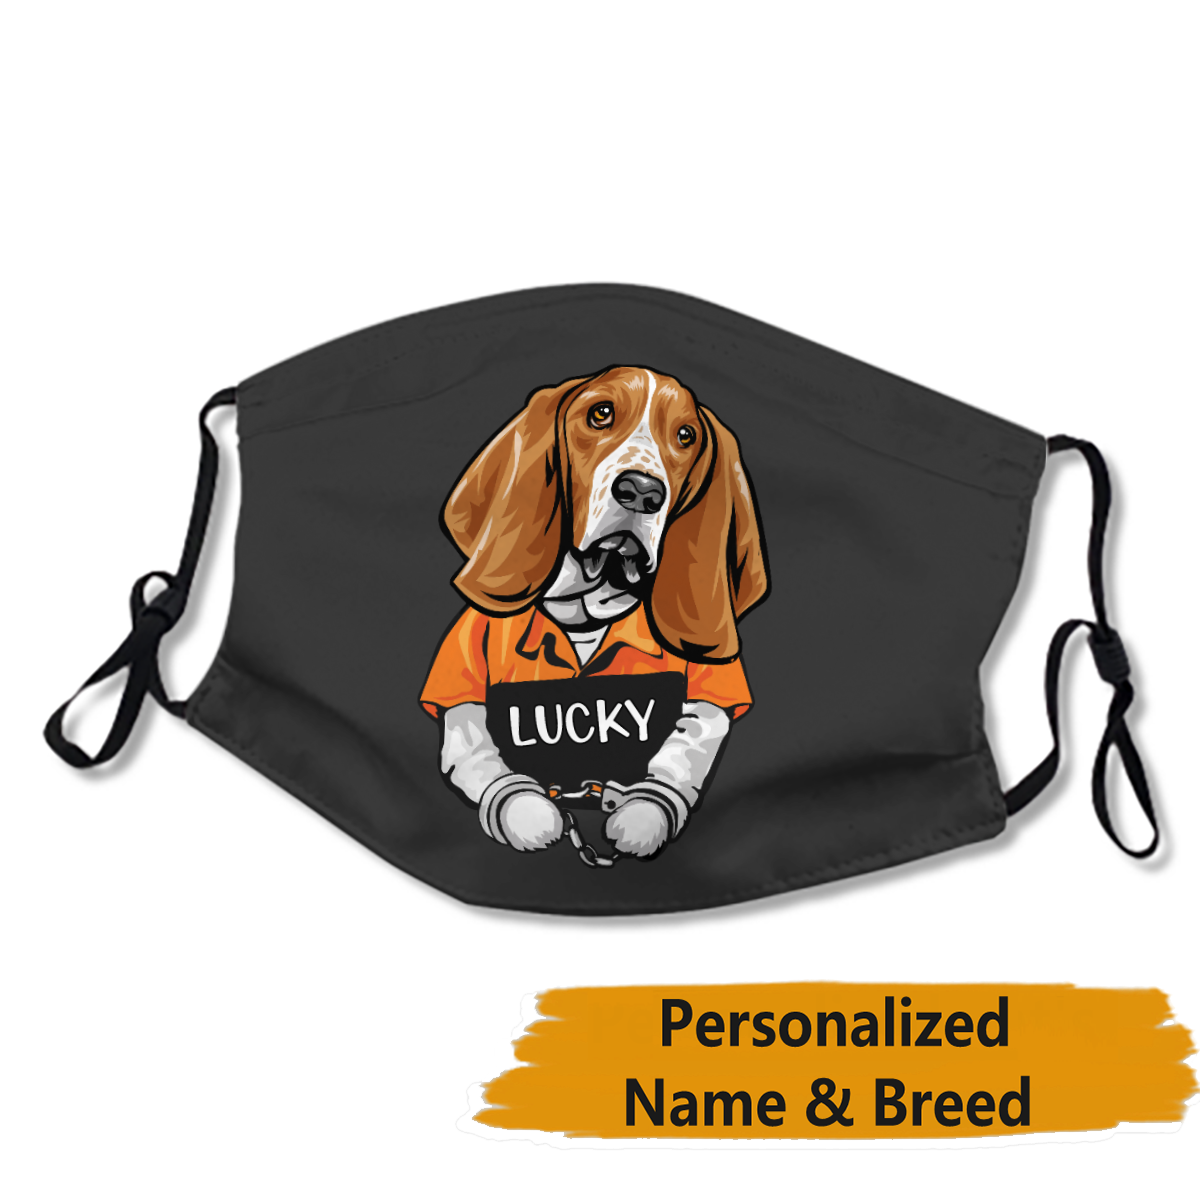 Personalized Dog's Name & Breed Face Mask No.4